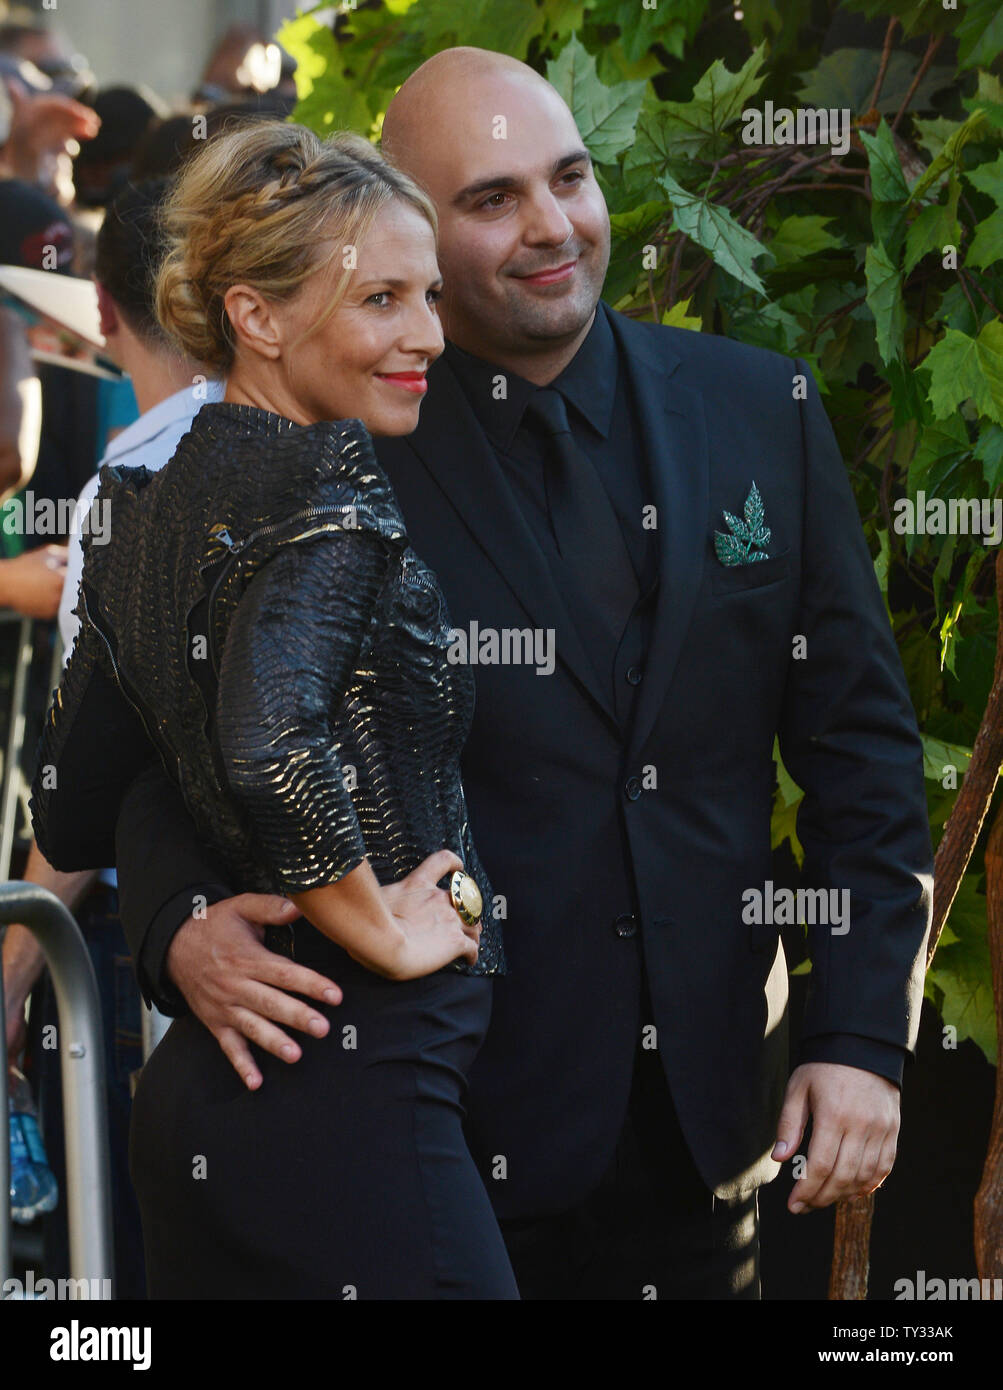 Producer Ahmet Zappa and his wife Shana Muldoon attend the premiere of the motion picture comedy/fantasy 'The Odd Life of Timothy Green', at the El Capitan Theatre in the Hollywood section of Los Angeles on August 6, 2012.  UPI/Jim Ruymen Stock Photo